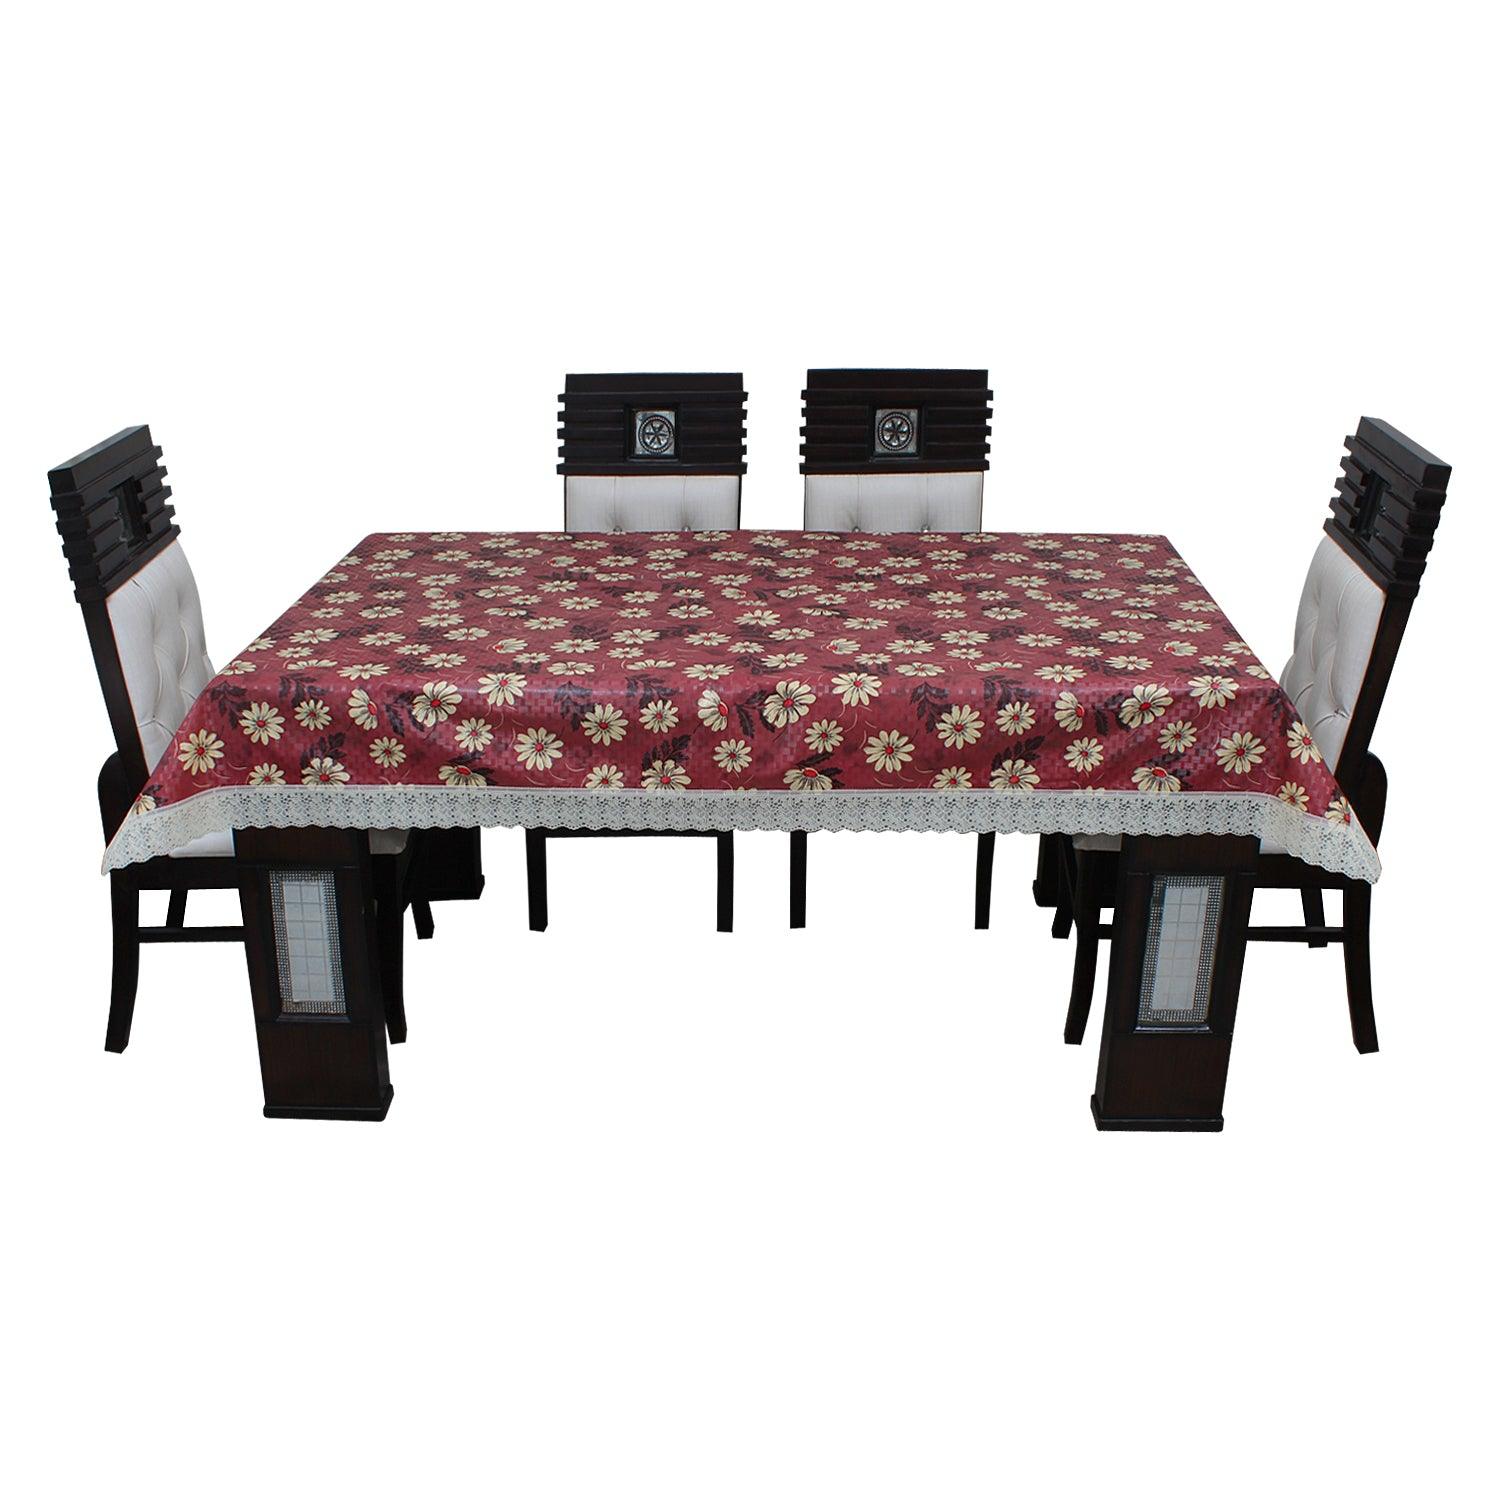 Waterproof and Dustproof Dining Table Cover, SA18 - Dream Care Furnishings Private Limited